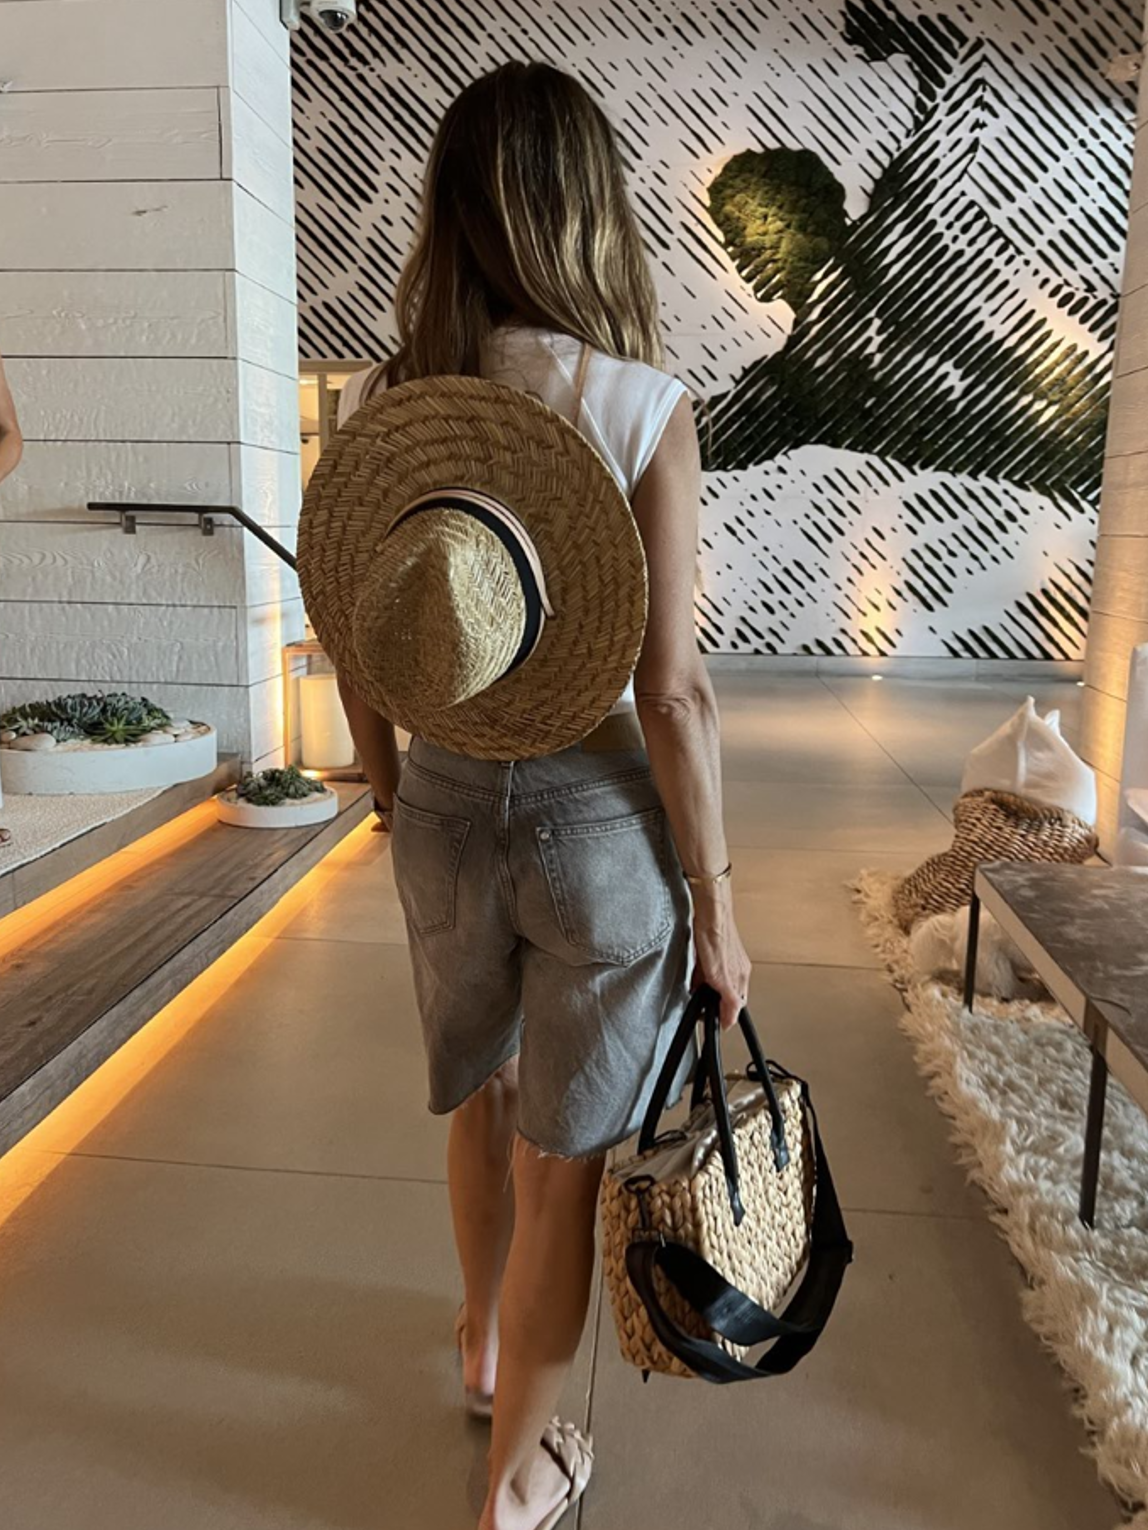 person wearing the tower hat and holding the gabie medium sized hyancinth straw bag with black leather handles and black crossbody strap